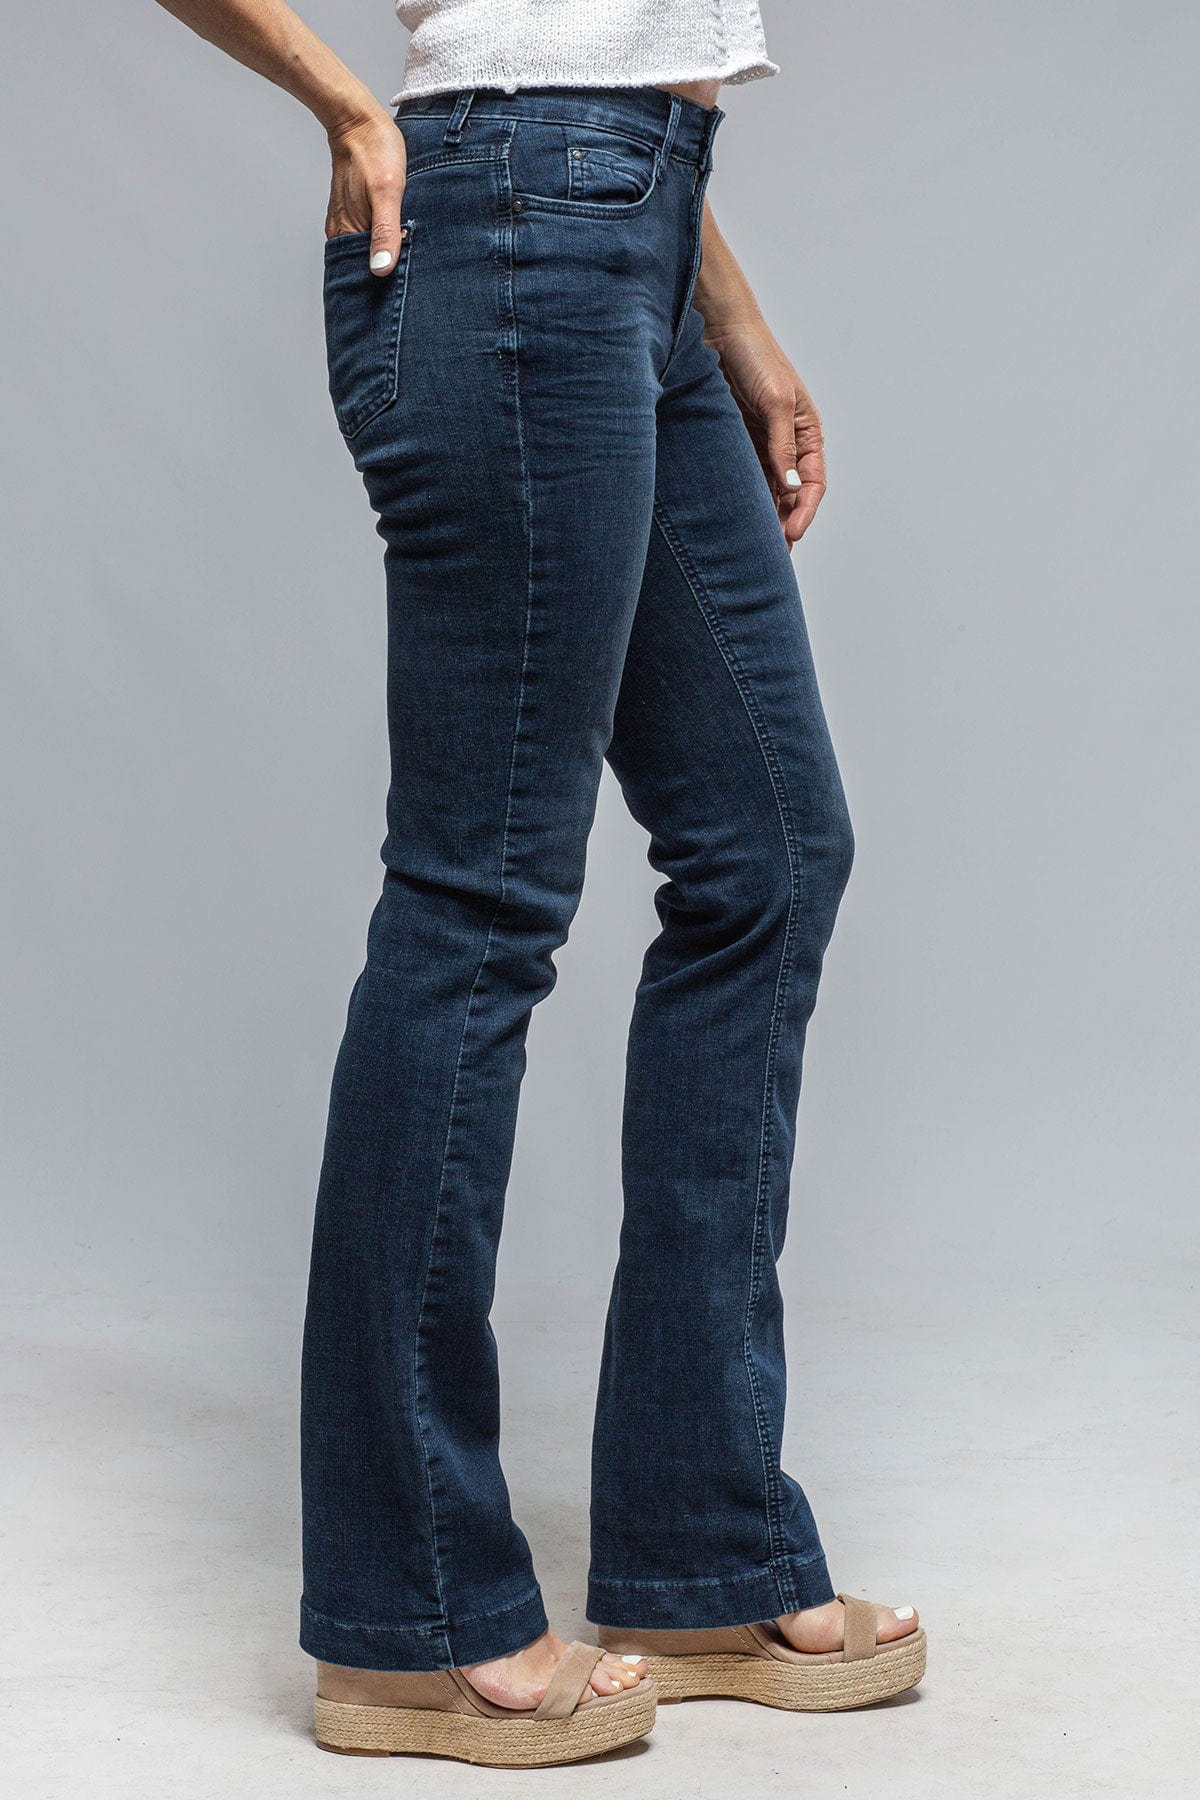 in Basic | Slight Dream Axel\'s Boot Mac Vail Used MAC Blue Jeans of